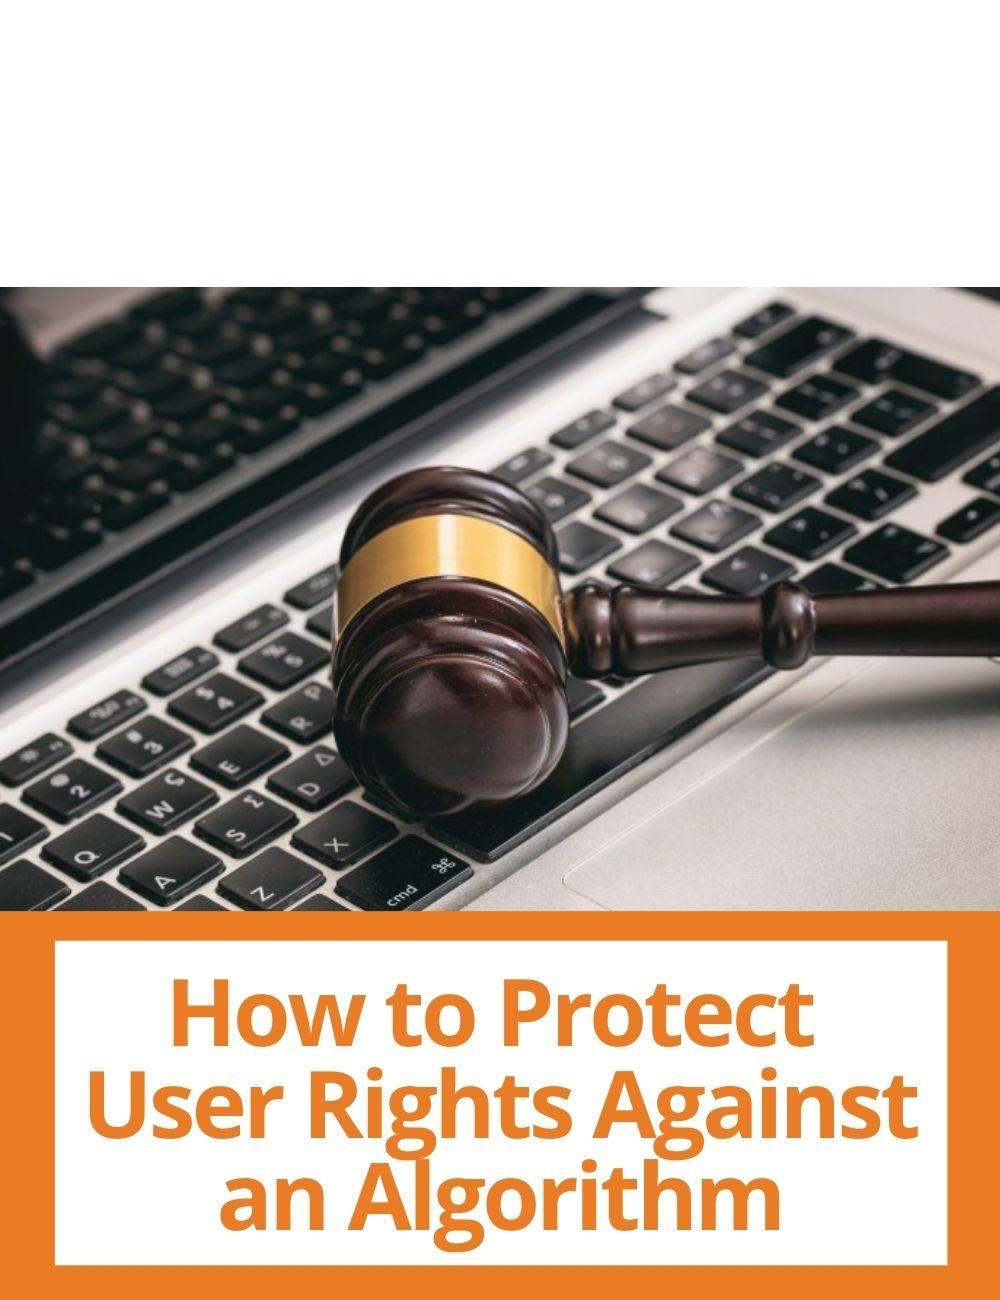 Link to related stories. Image: a gavel on a computer. Story headline: How to Protect User Rights Against an Algorithm